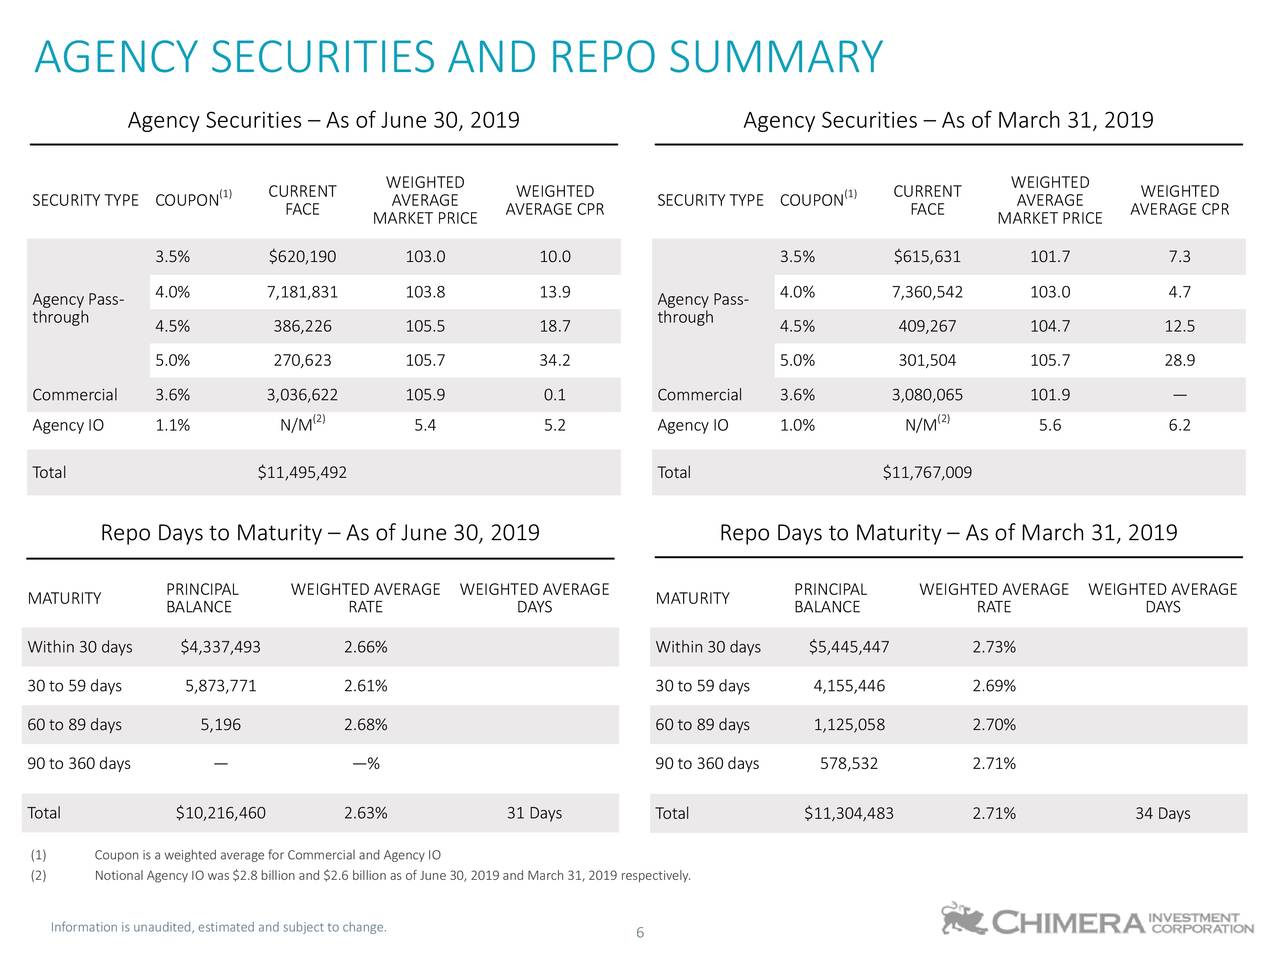 AGENCY SECURITIES AND REPO SUMMARY